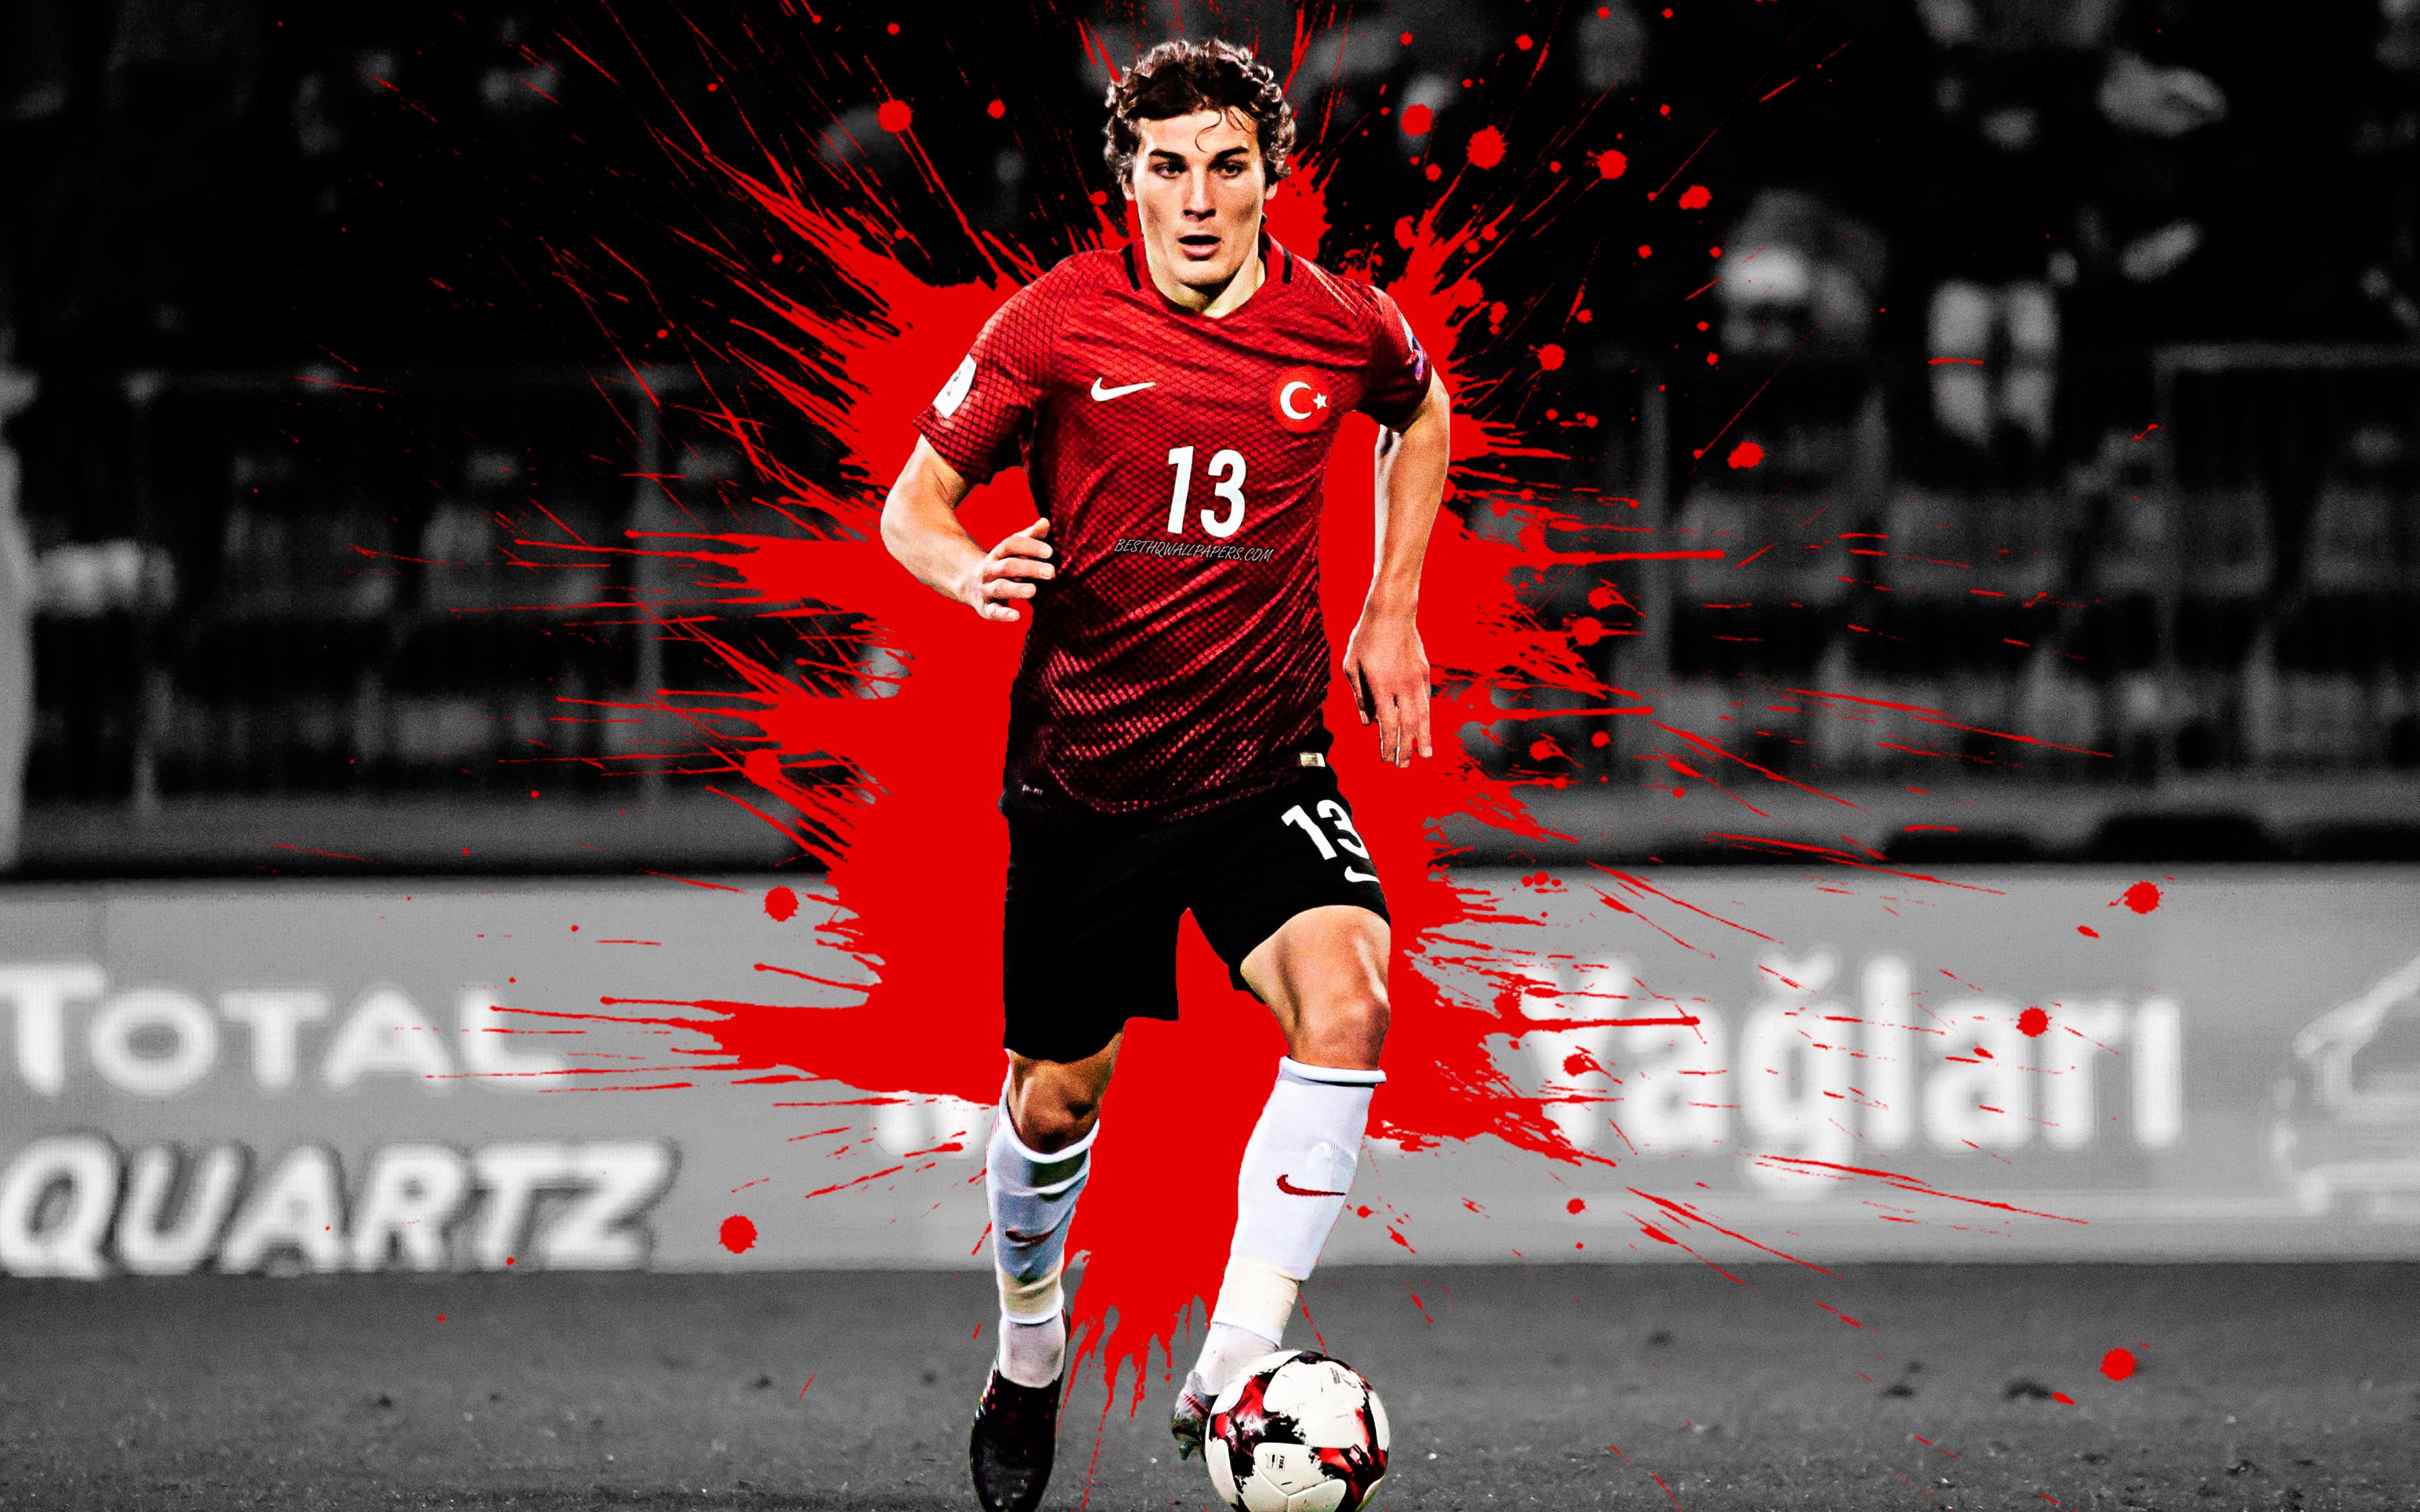 Download wallpaper Caglar Soyuncu, 4k, Turkey national football team, art, splashes of paint, grunge art, turkish footballer, creative art, Turkey, football for desktop with resolution 3840x2400. High Quality HD picture wallpaper